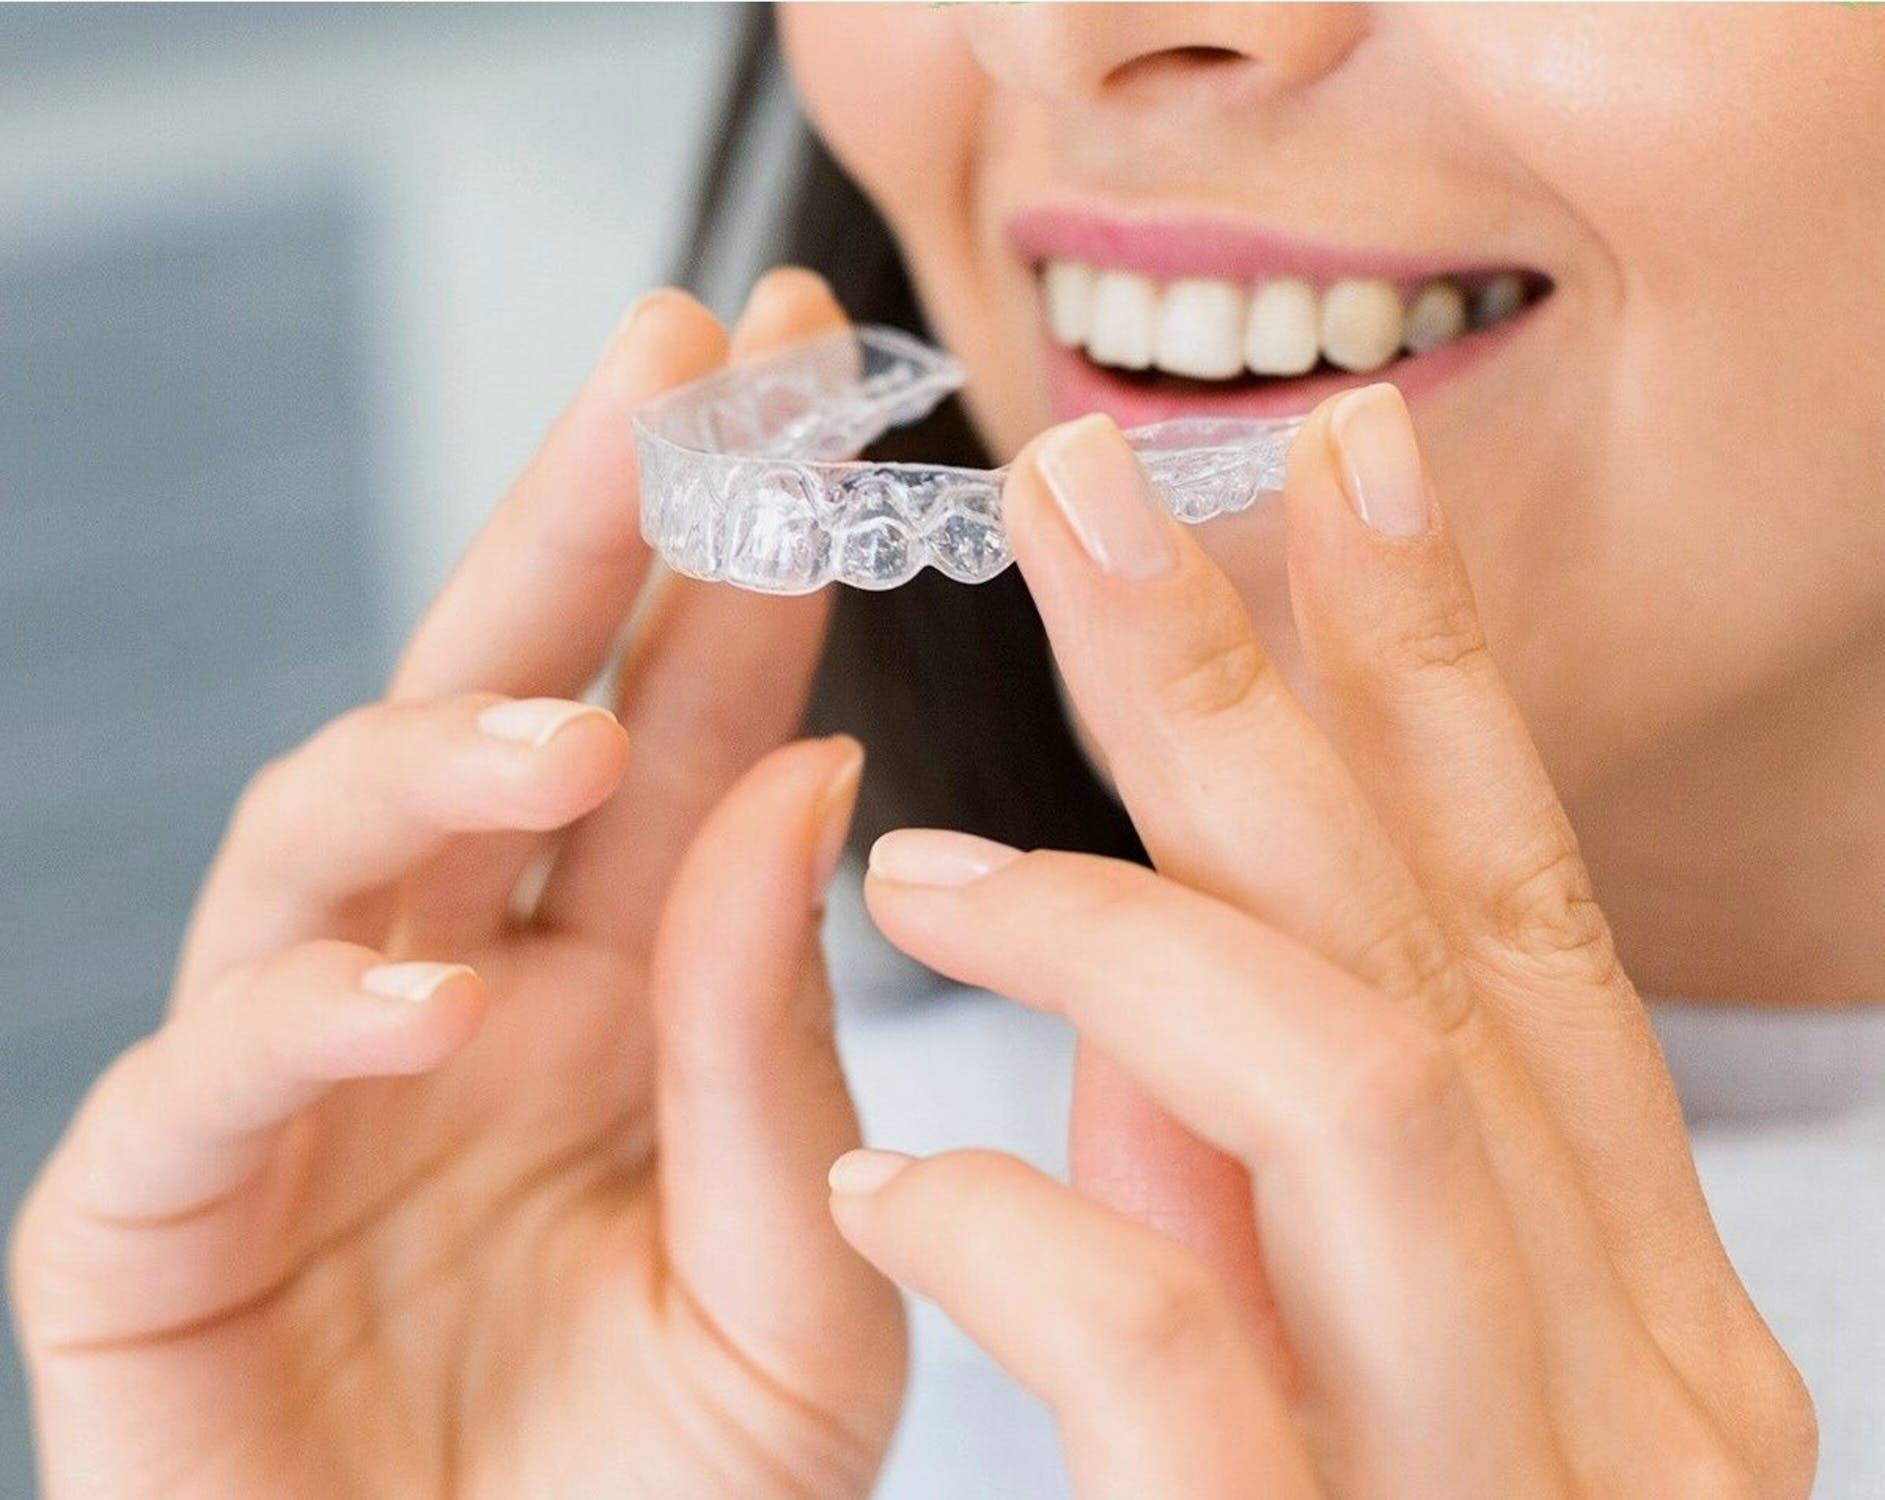 A Guide To Preparing Your Child For Braces Or Invisalign Treatment